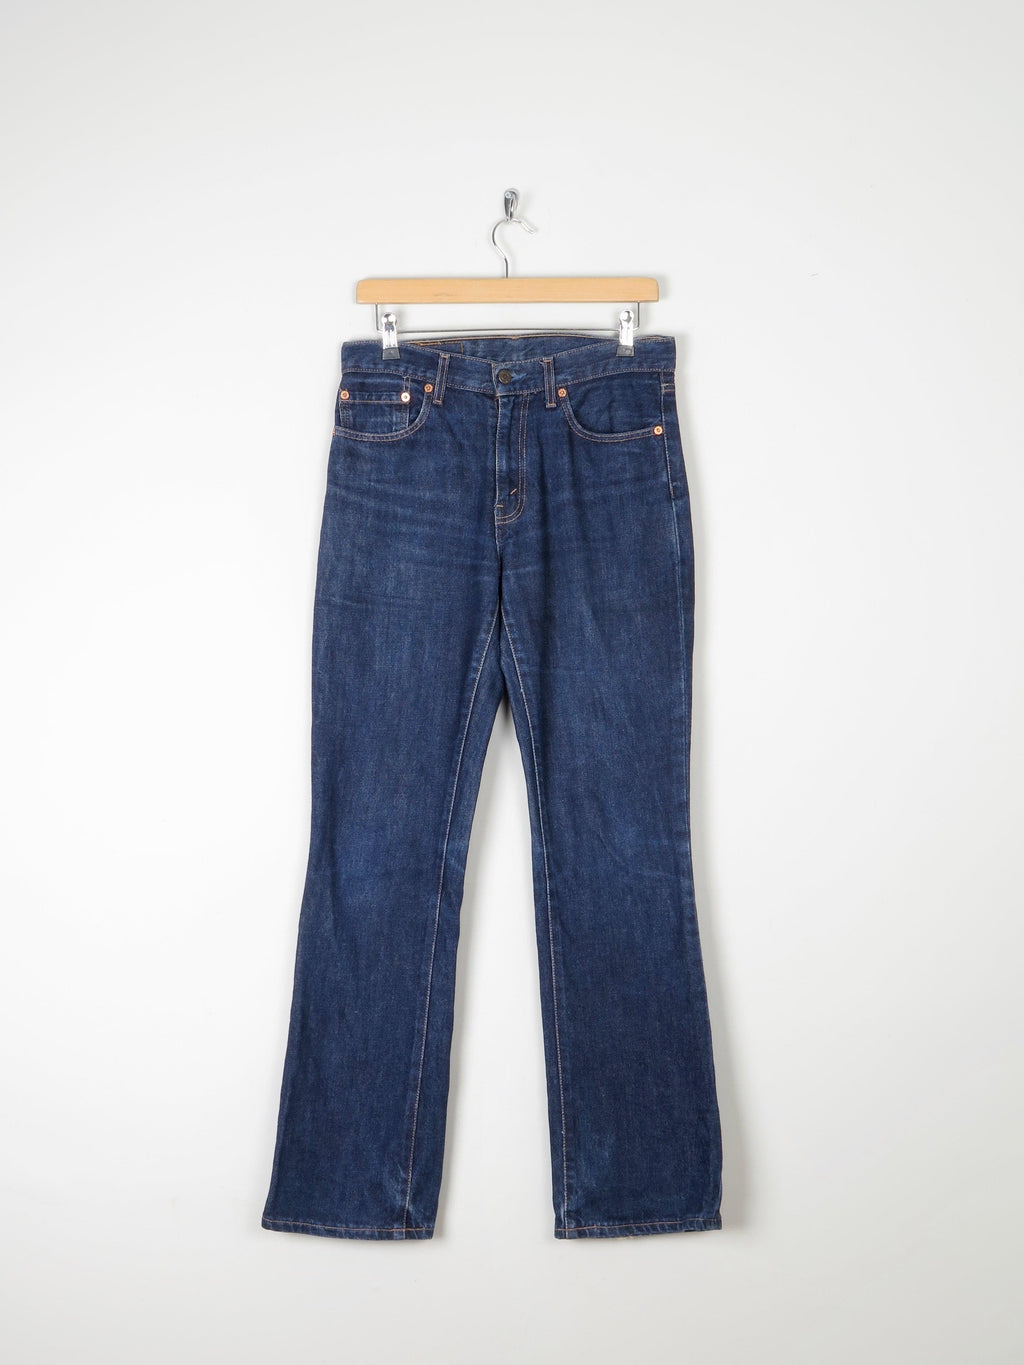 Dark Blue Vintage Levis With Slight Boot Cut Kick Flare S 28/32L  525s - The Harlequin